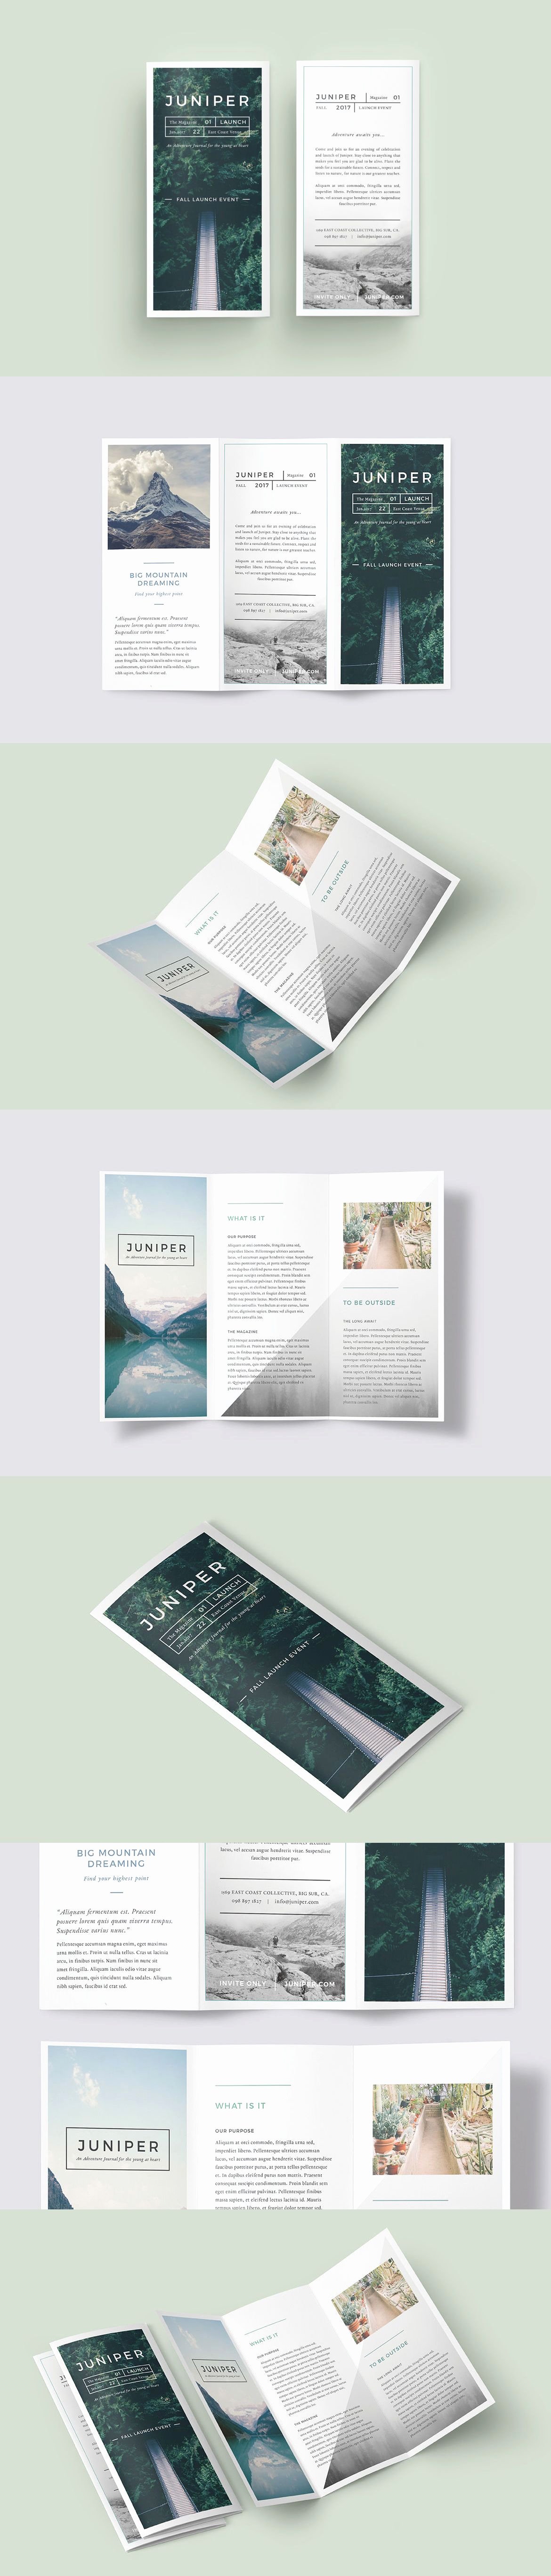 Indesign Trifold Brochure Template Awesome A Beautiful Multipurpose Tri Fold Dl Brochure Template